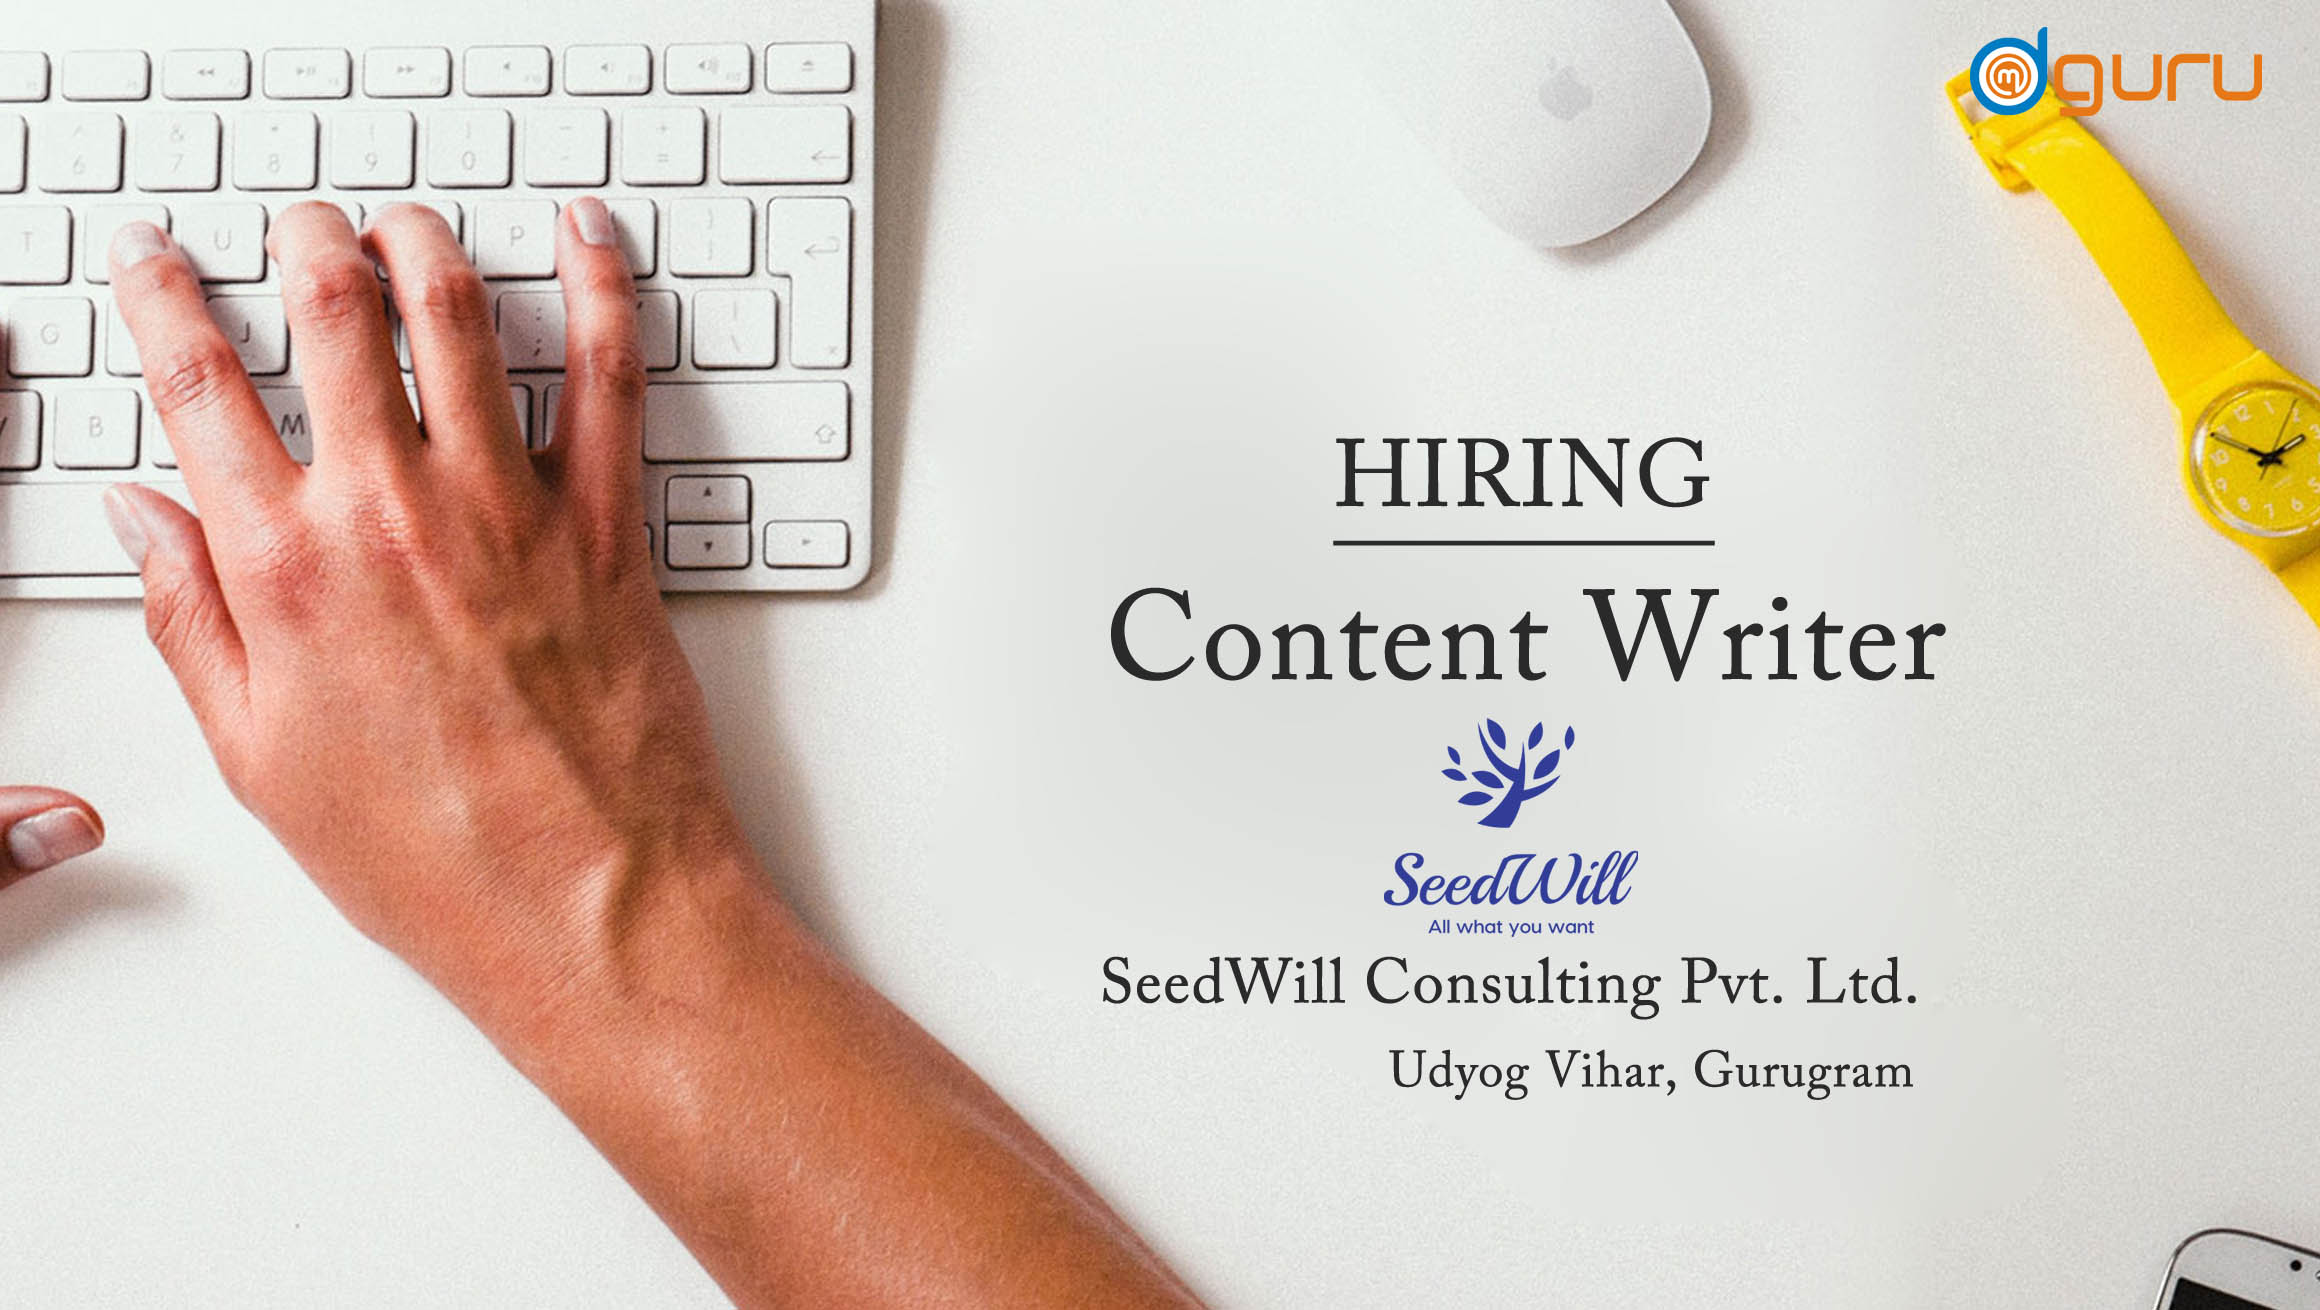 Job For Content Writer in Gurgaon, India